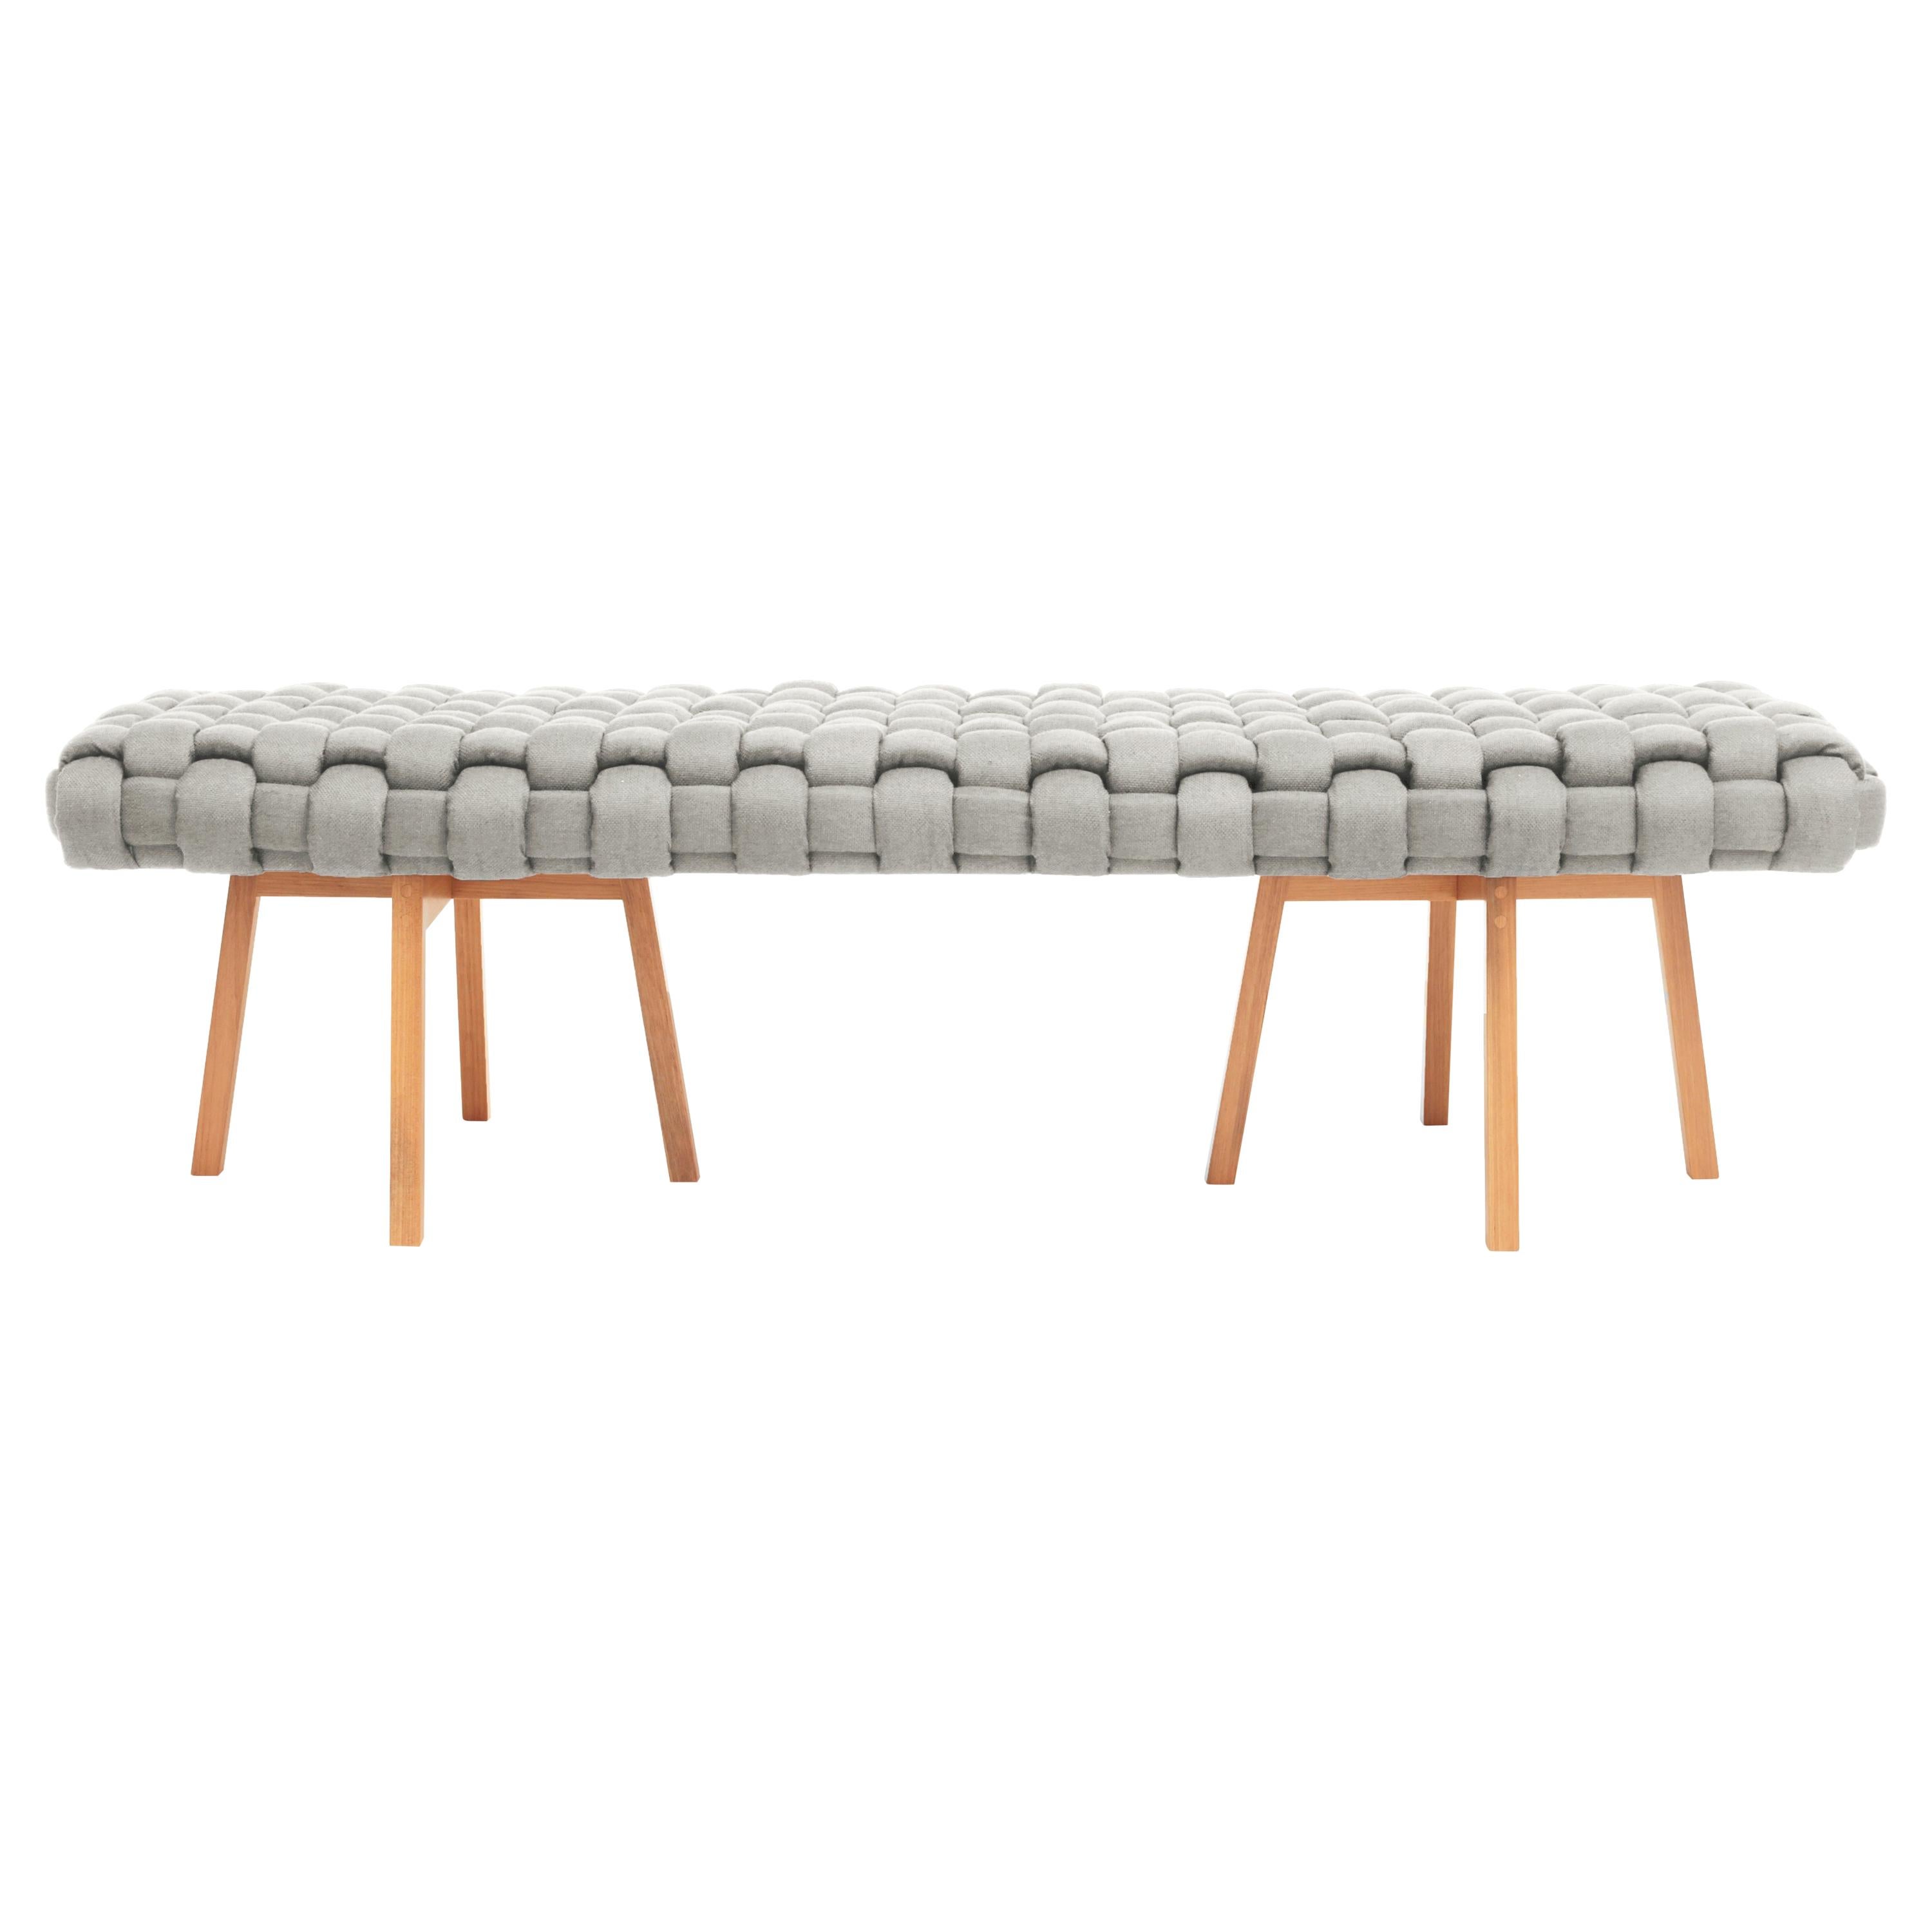 Contemporary Wood Bench, Handwoven Upholstery, the "Trama", Grey For Sale